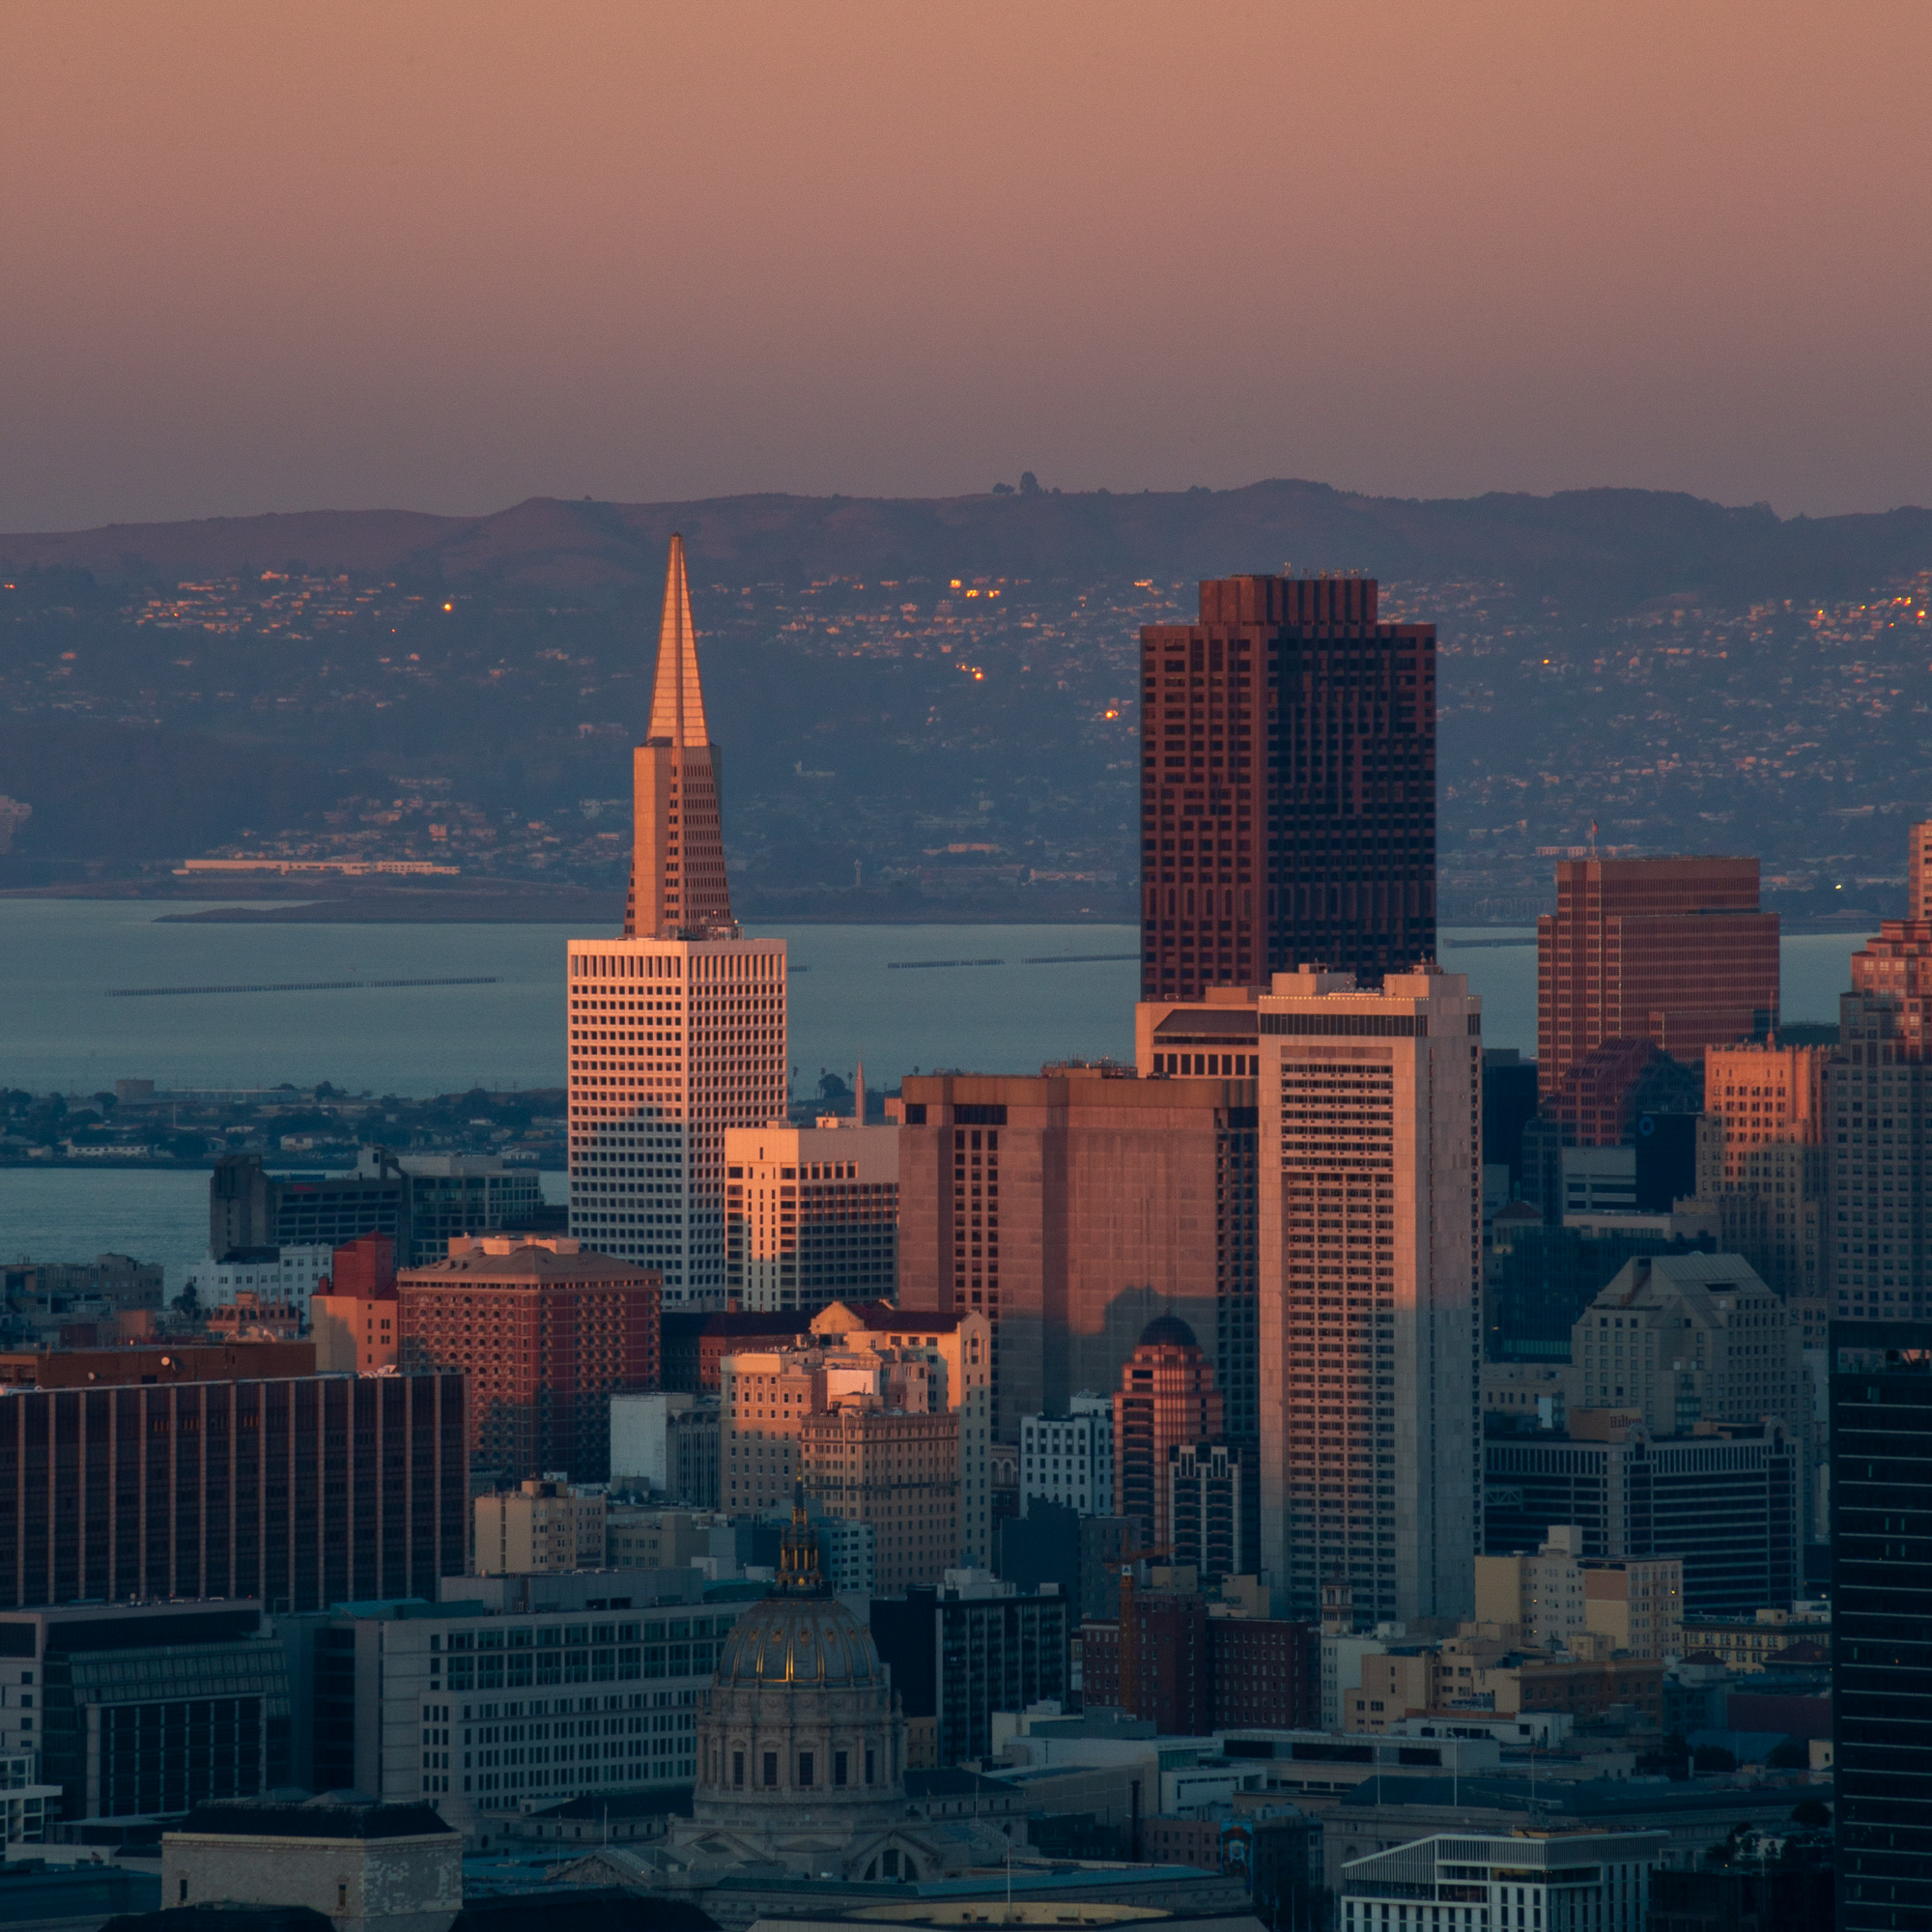 Transamerica Pyramid seen from Twin Peaks, image by Andrew Campbell Nelson